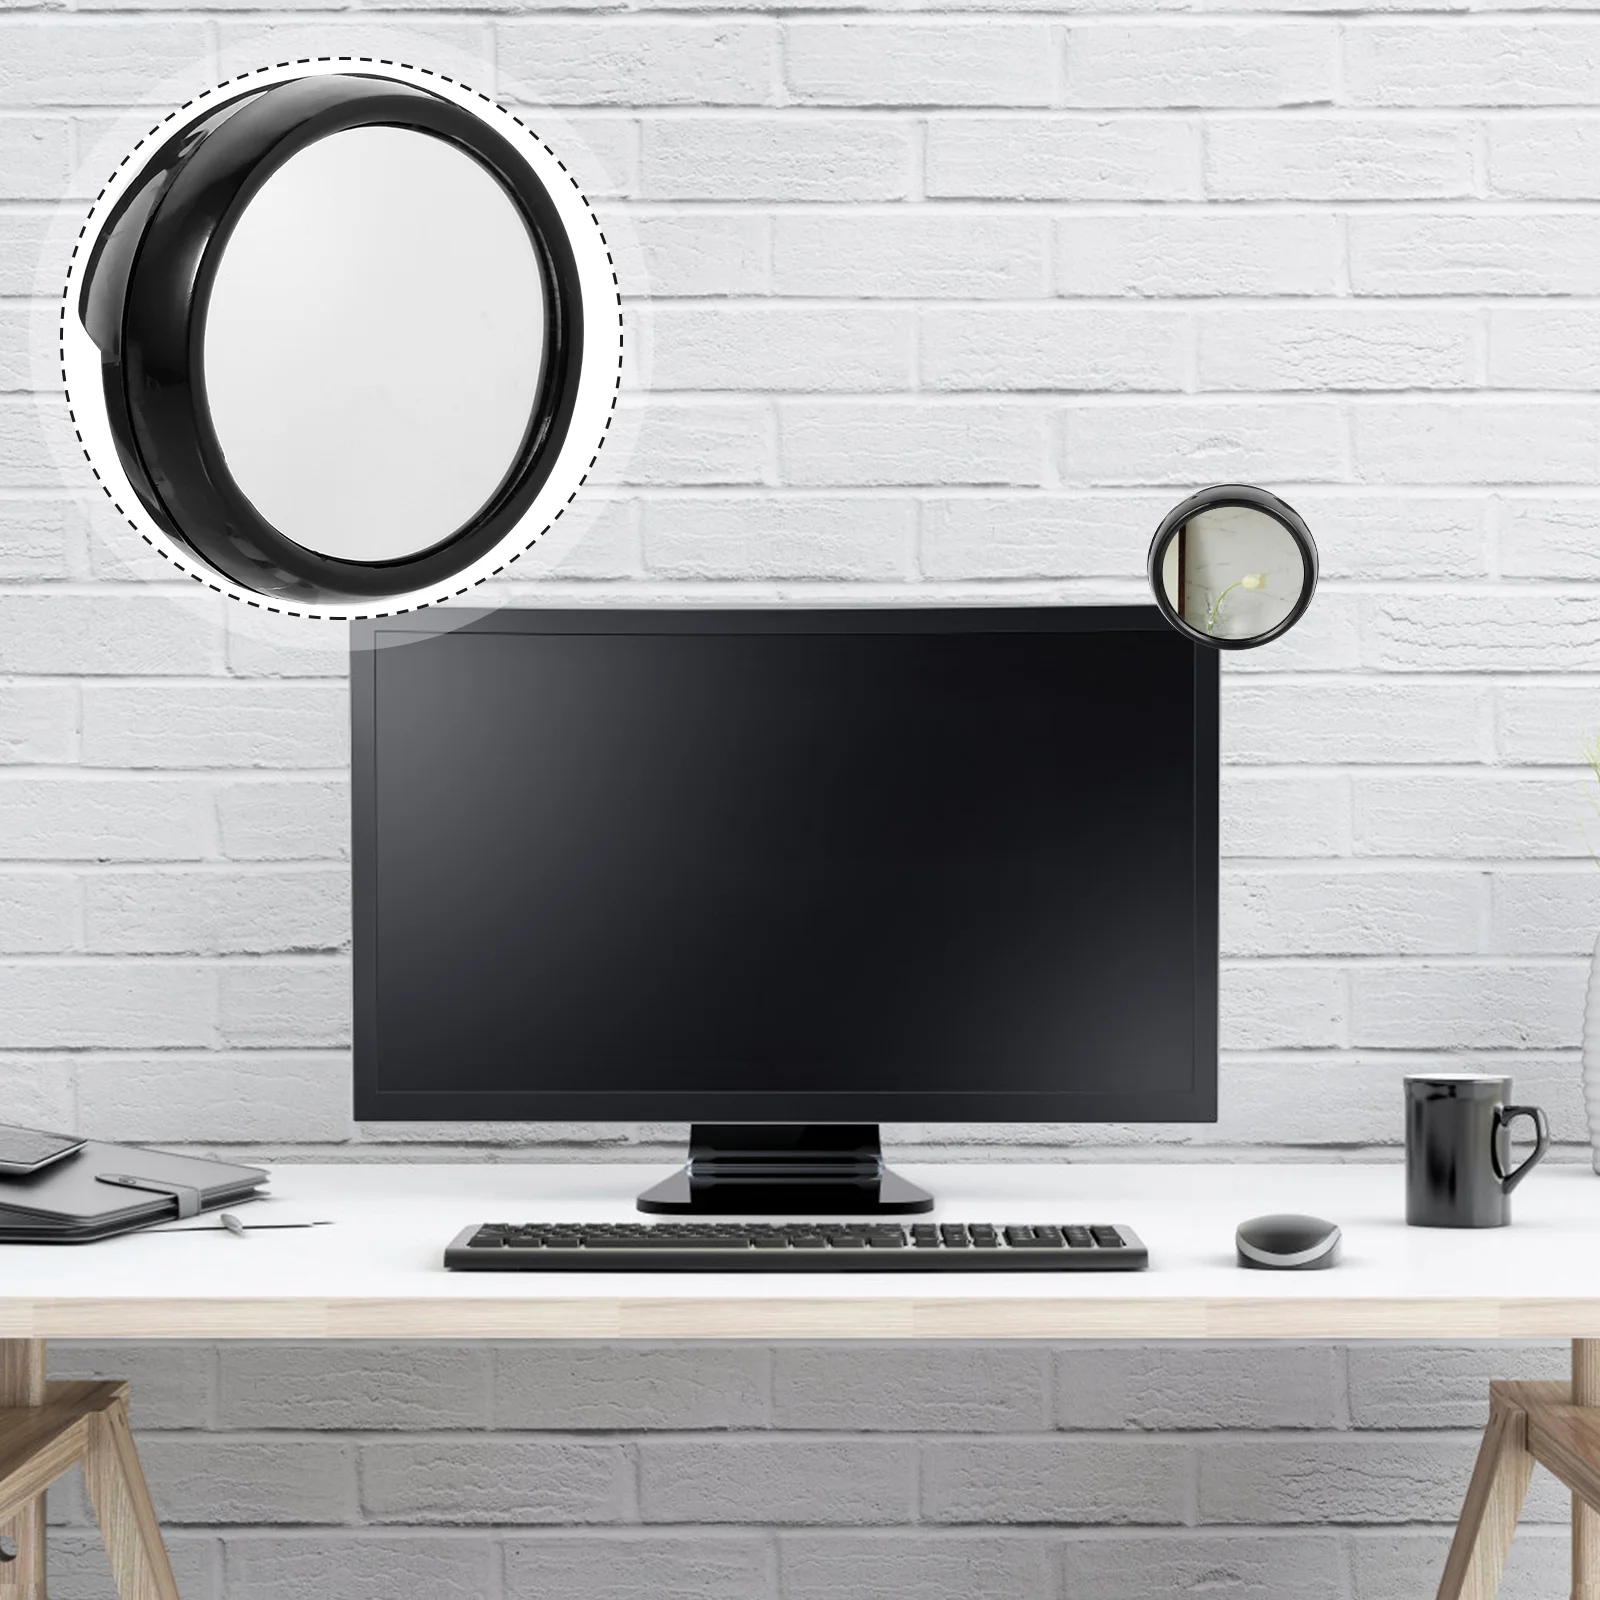 

Mirror Computer Rearview Rear View Cubicle Desk Office Monitor Screen Magnifying Clip Safety Pc Convex You Behind See Laptop